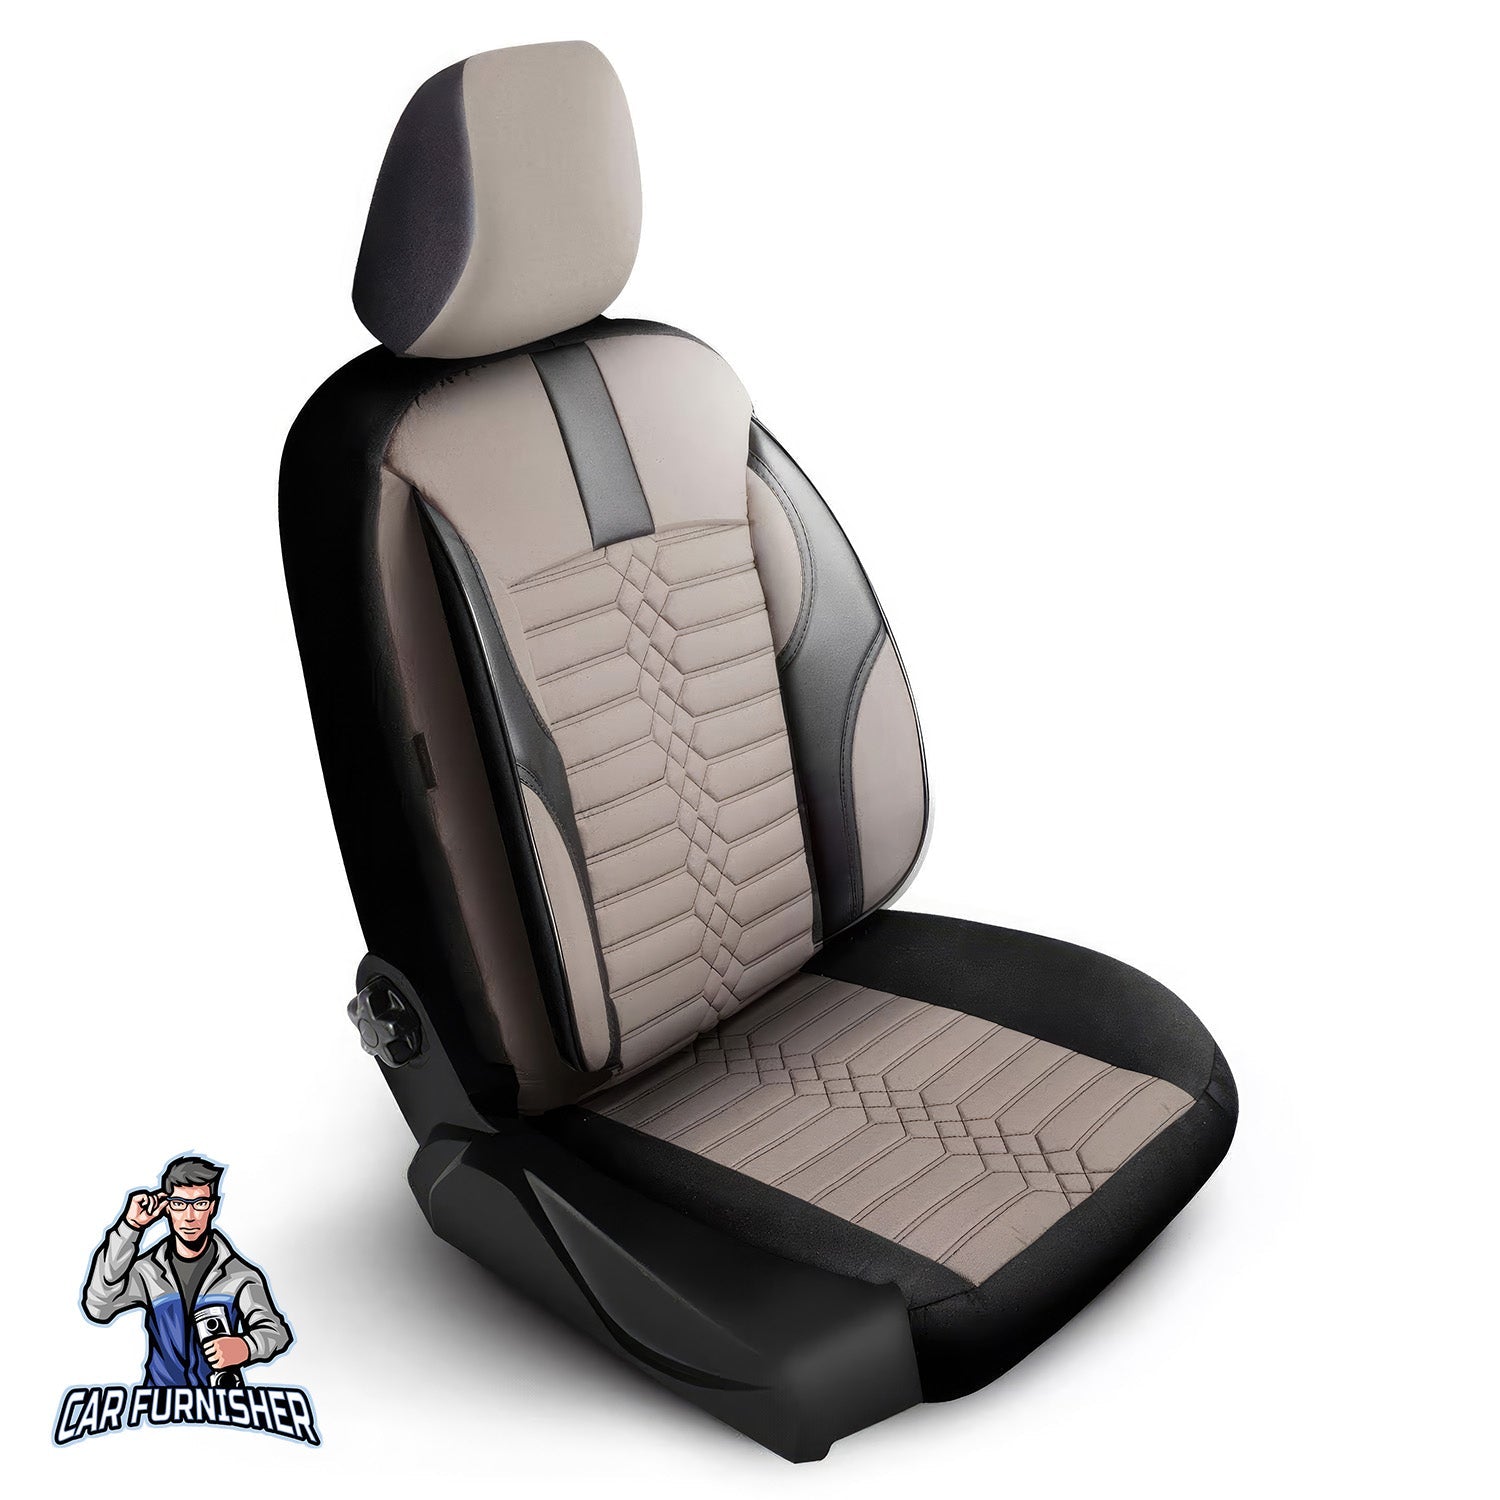 Volkswagen Jetta Seat Covers Athens Design Beige 5 Seats + Headrests (Full Set) Leather & Jacquard Fabric